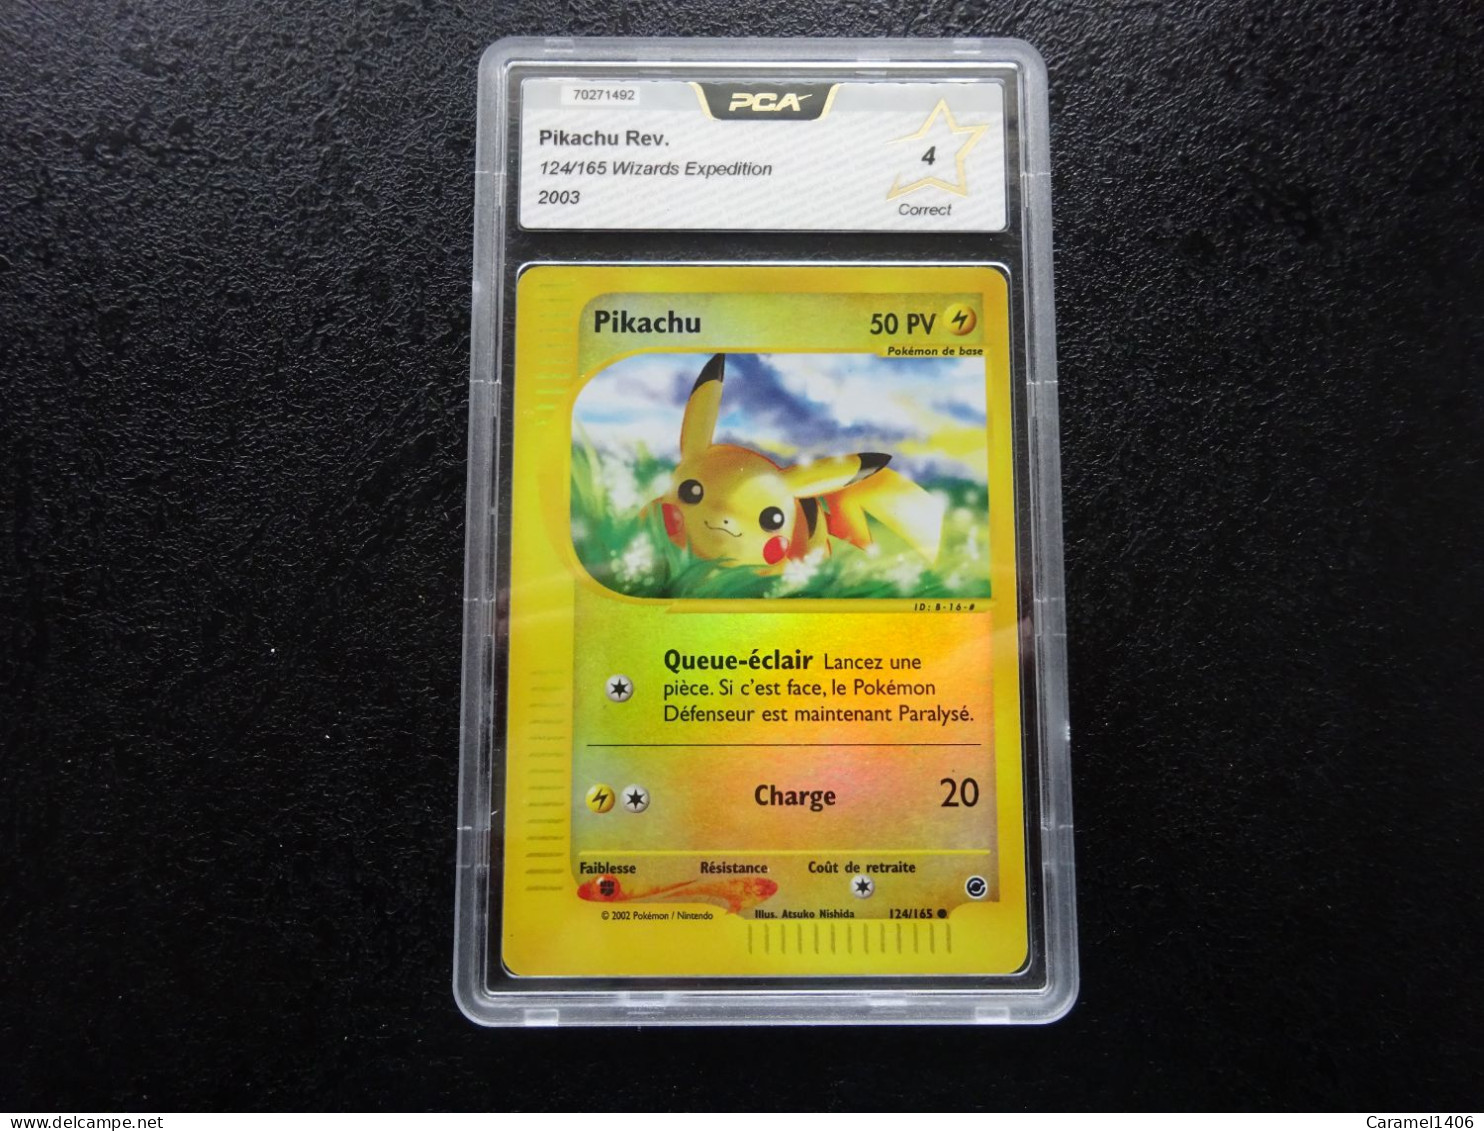 PIKACHU REVERSE 124/165 WIZARDS EXPEDITION 2003 PCA 4 Francaise - Wizards